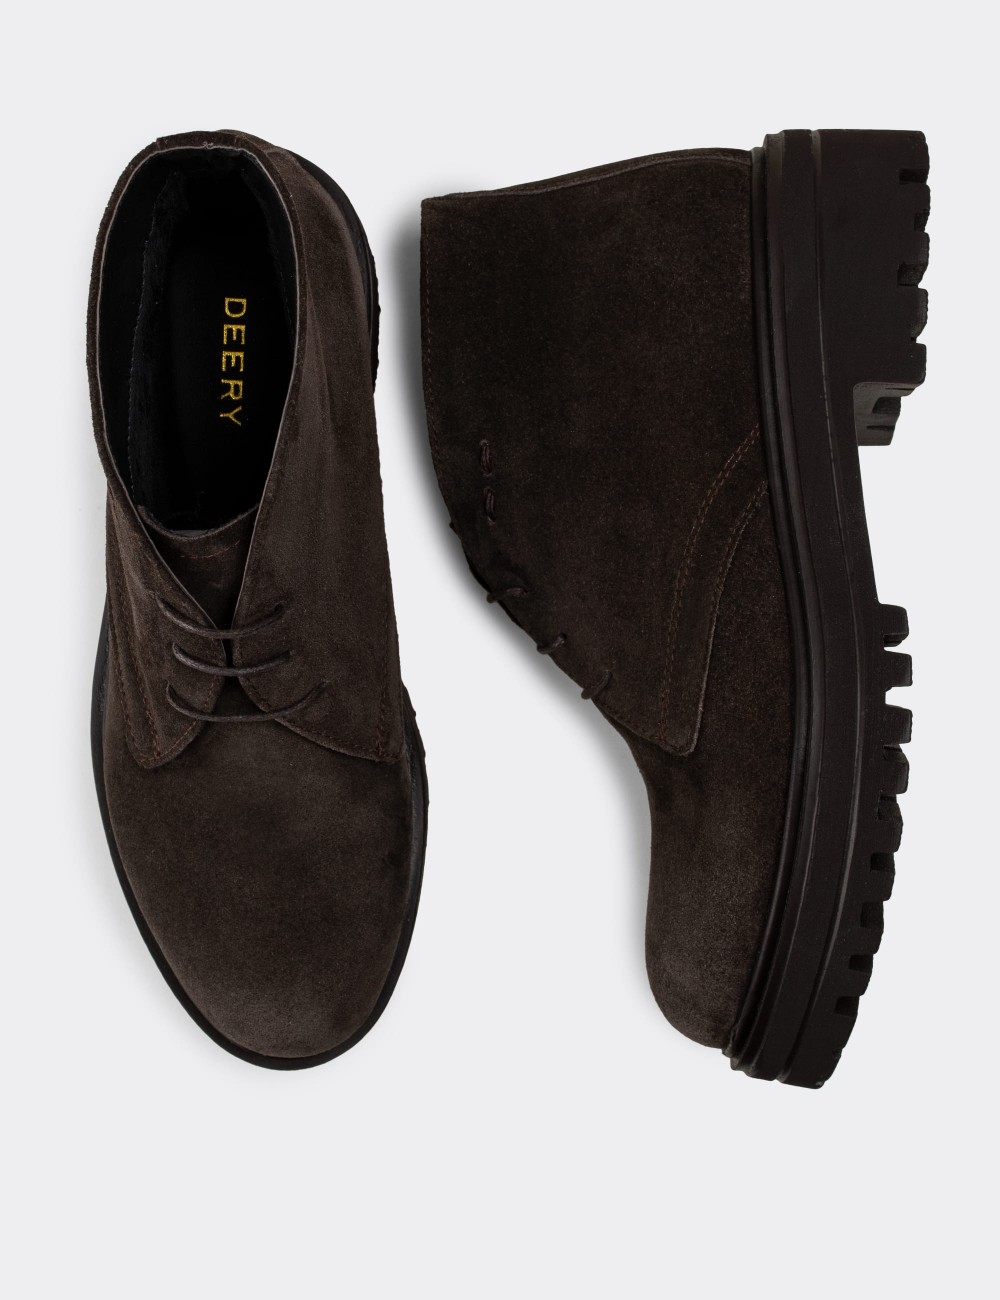 Brown Suede Leather Desert Boots - 01847ZKHVE02